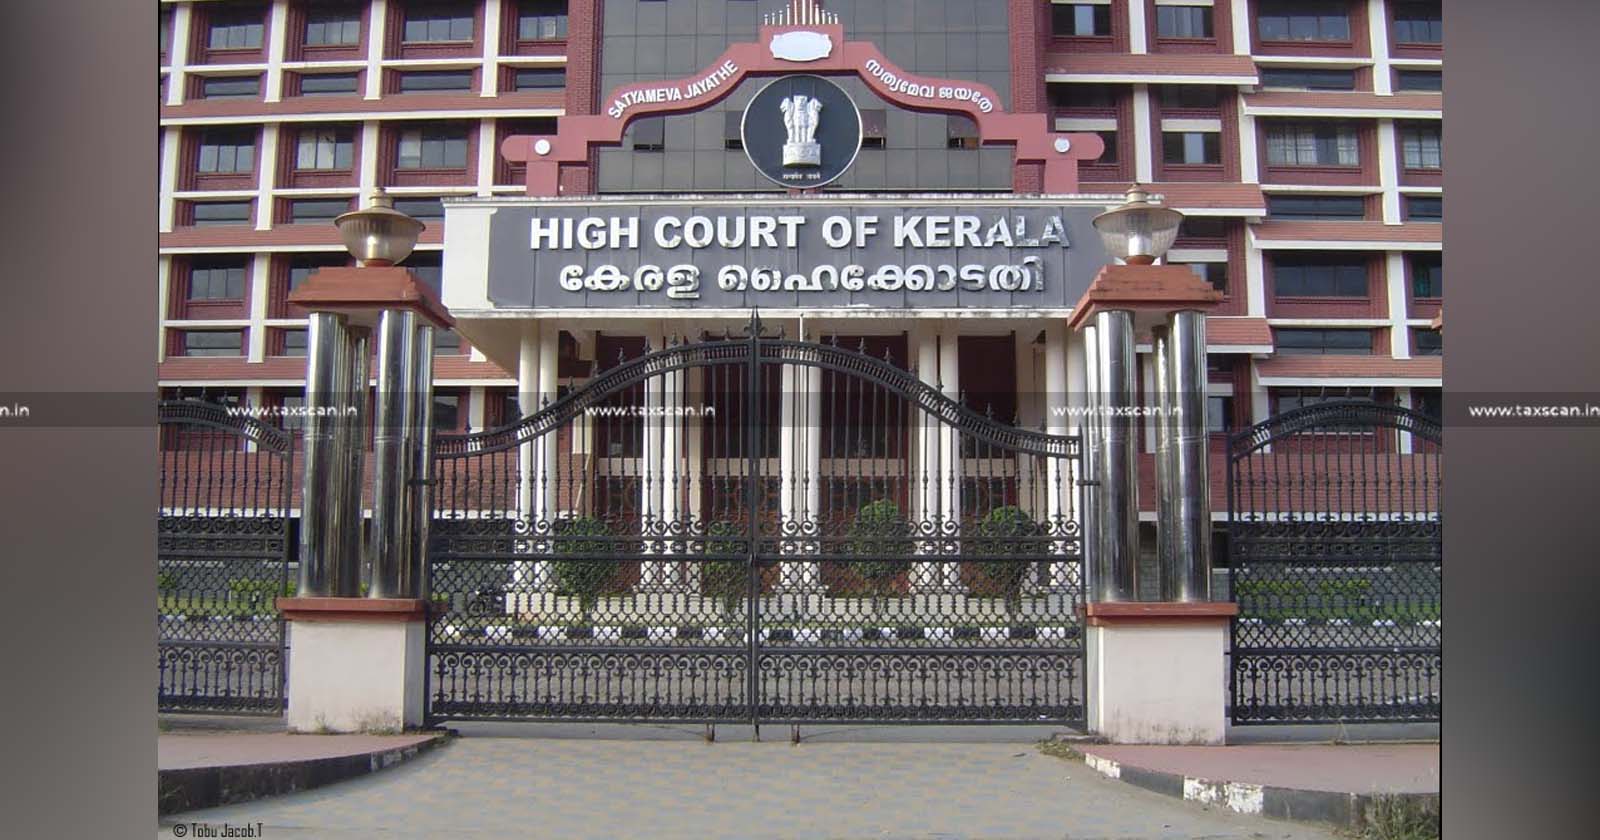 Appeal against Income -Tax Assessment Order - Stay Application-Kerala HC - Decide Stay -Application Expeditiously-TAXSCAN